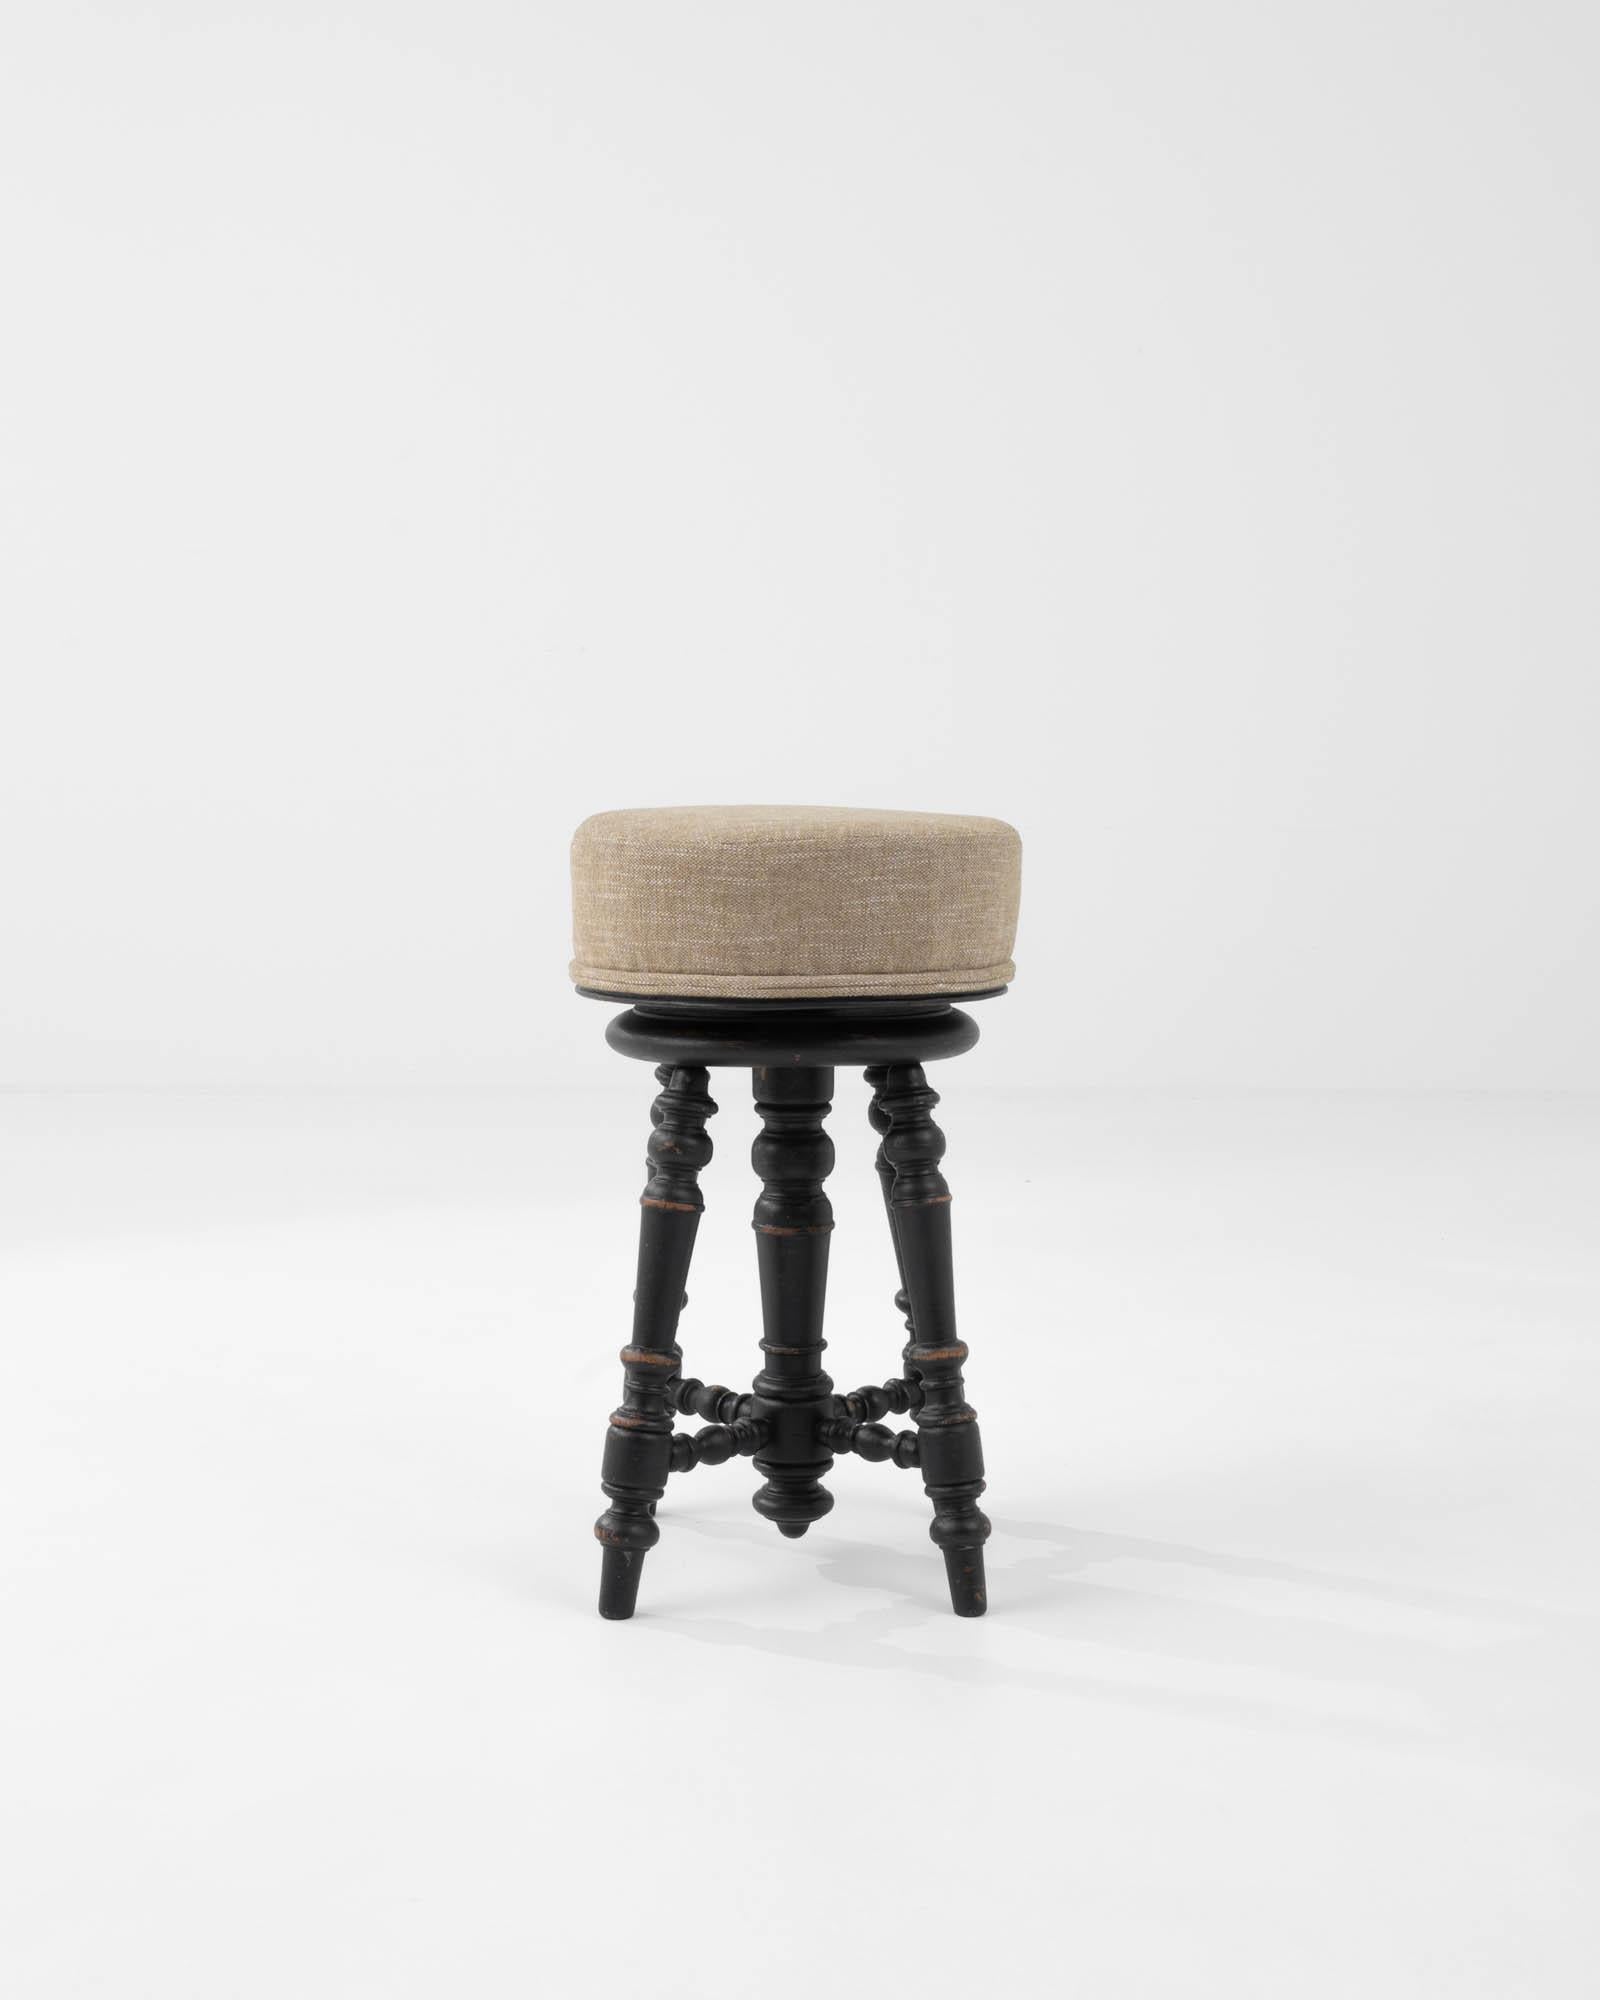 A minimal and decorative French design from circa 1900. Wooden turned legs support a round upholstered seat, rotating up and down with a spinning mechanism hidden inside a central column. The tone of the wood, a gently worn russet hue, contrasts